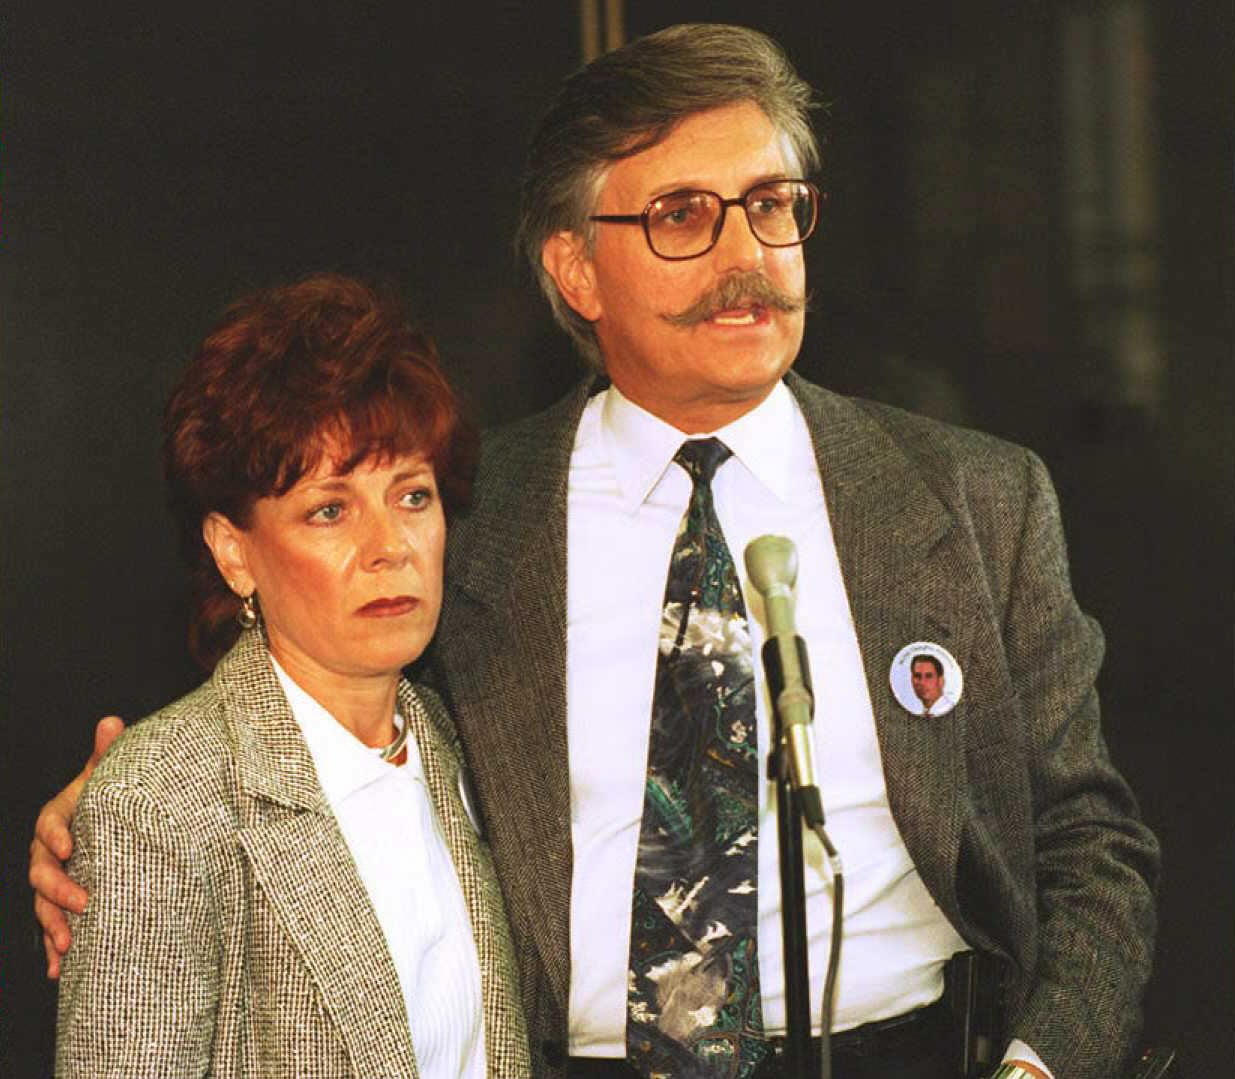 Ron Goldman’s father, Fred and his wife Patti